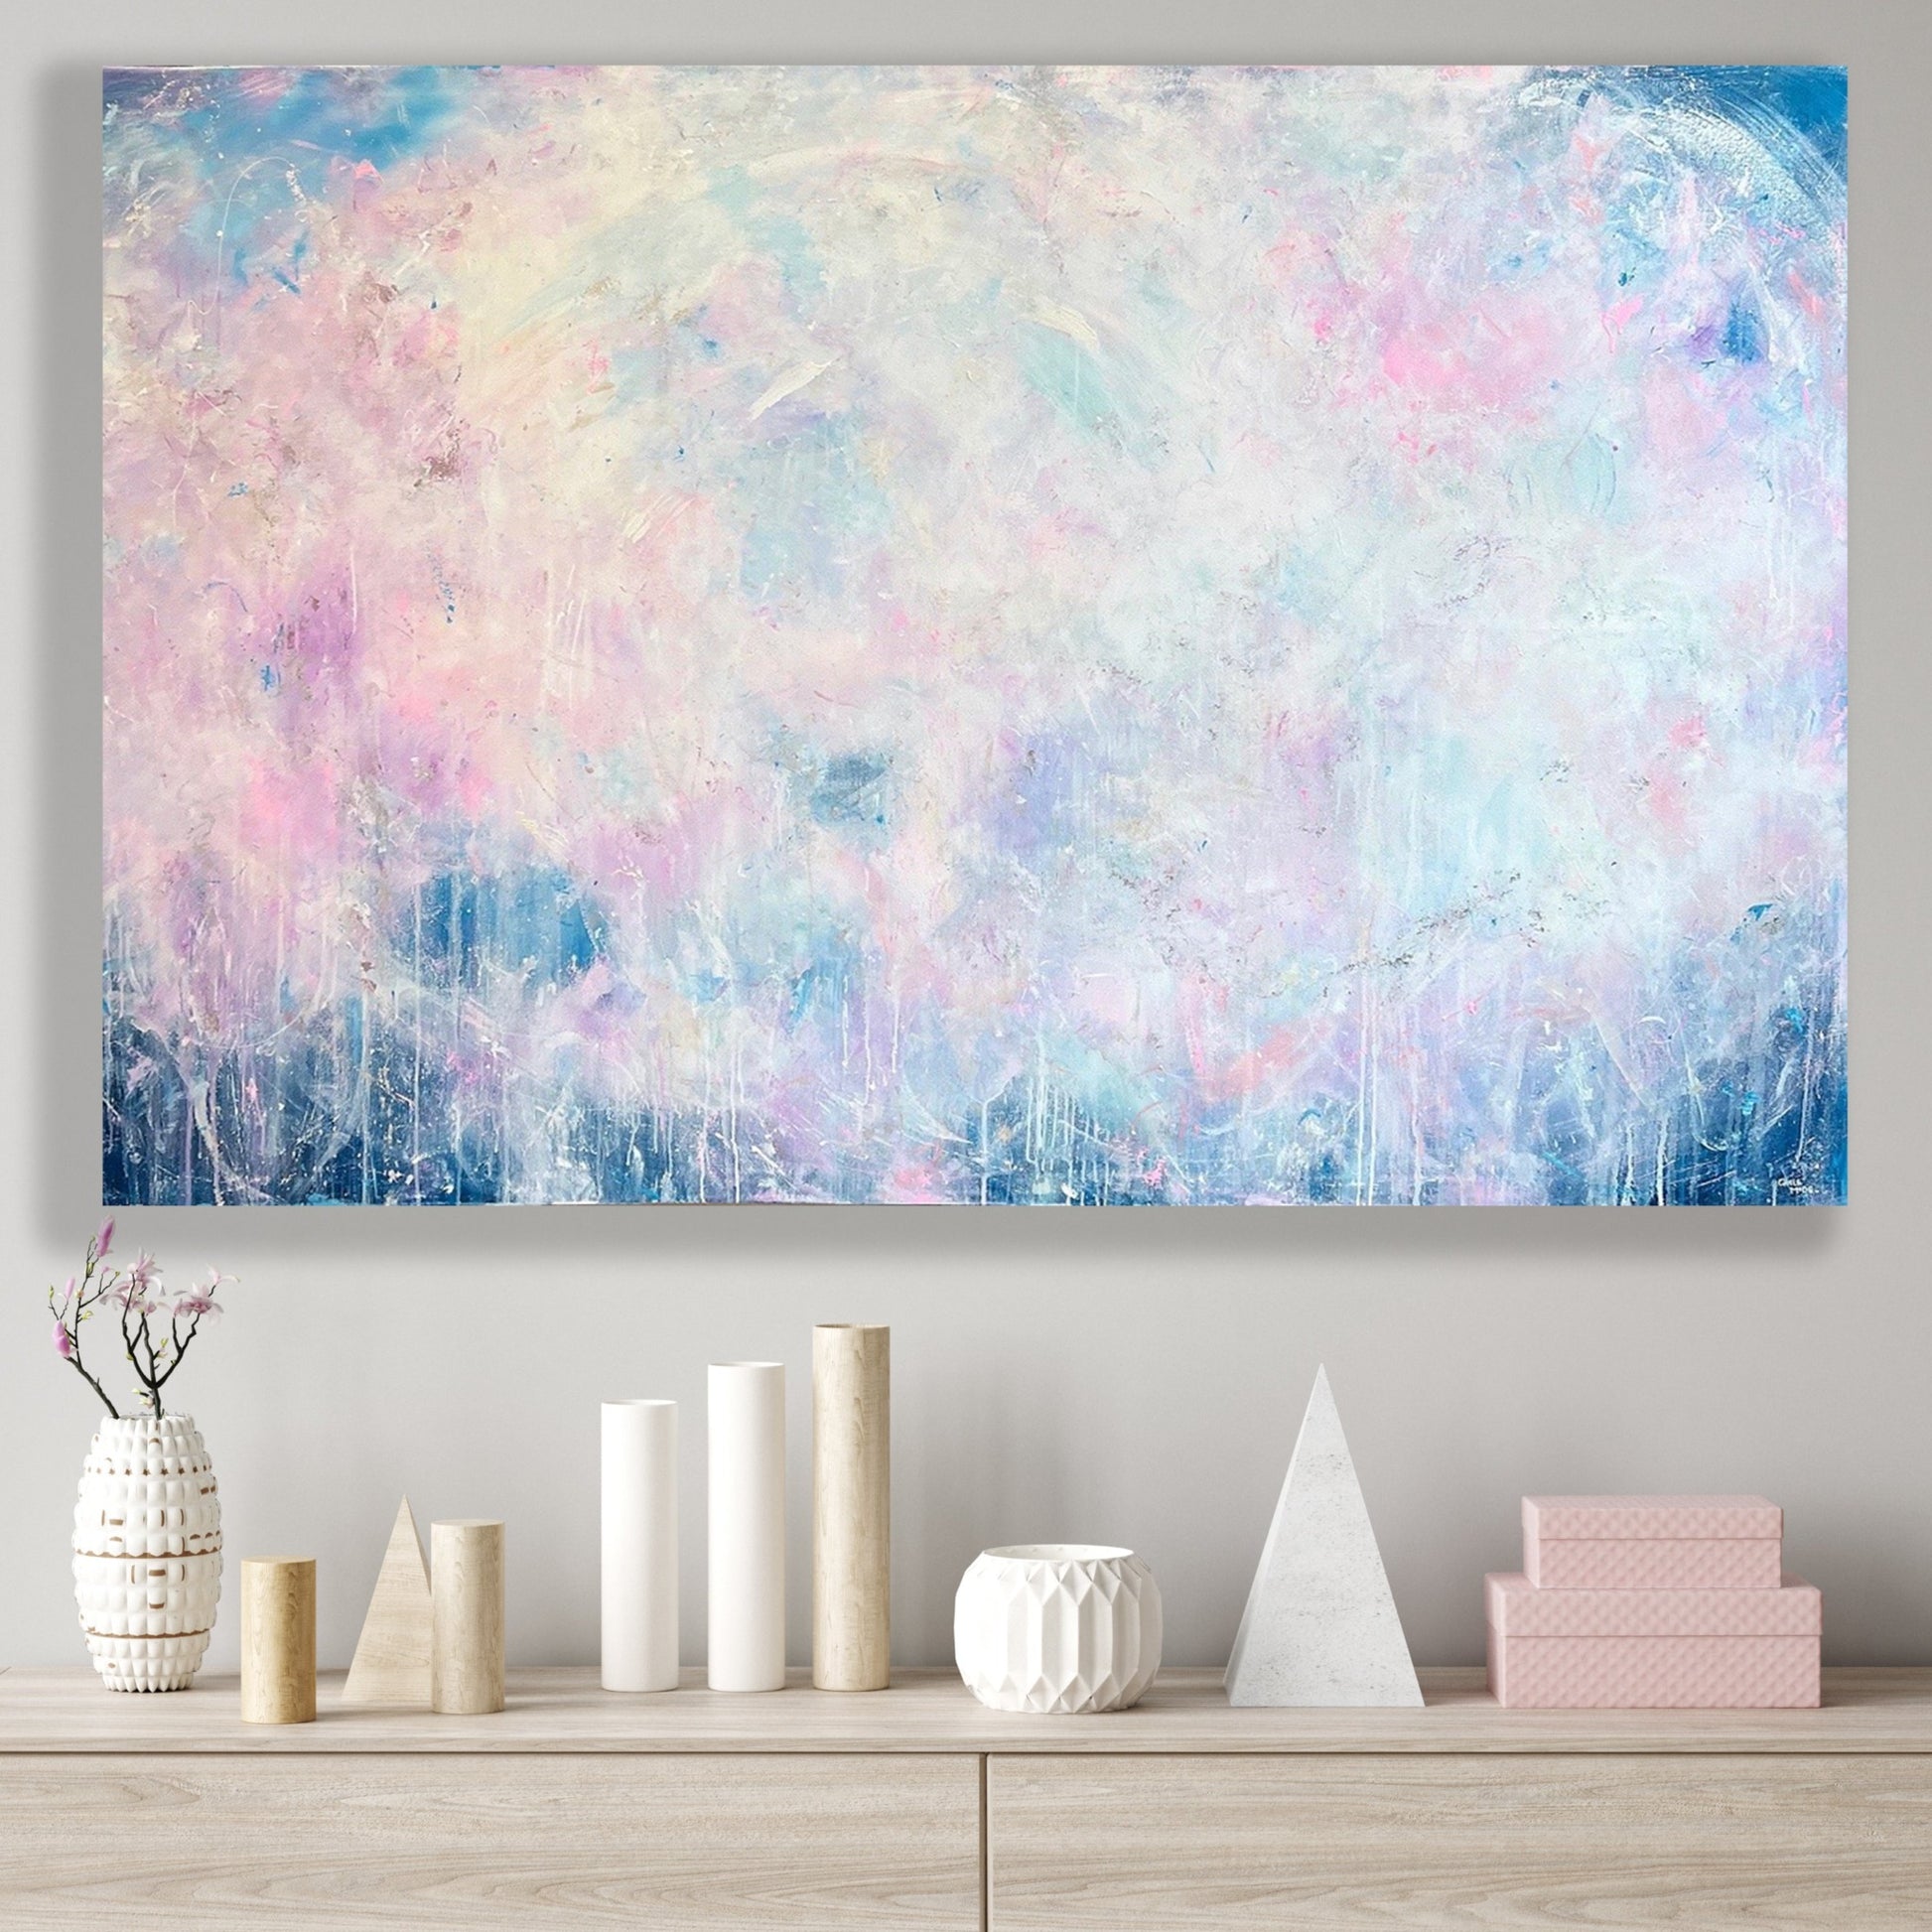 Large Living Room Painting | Chels Made